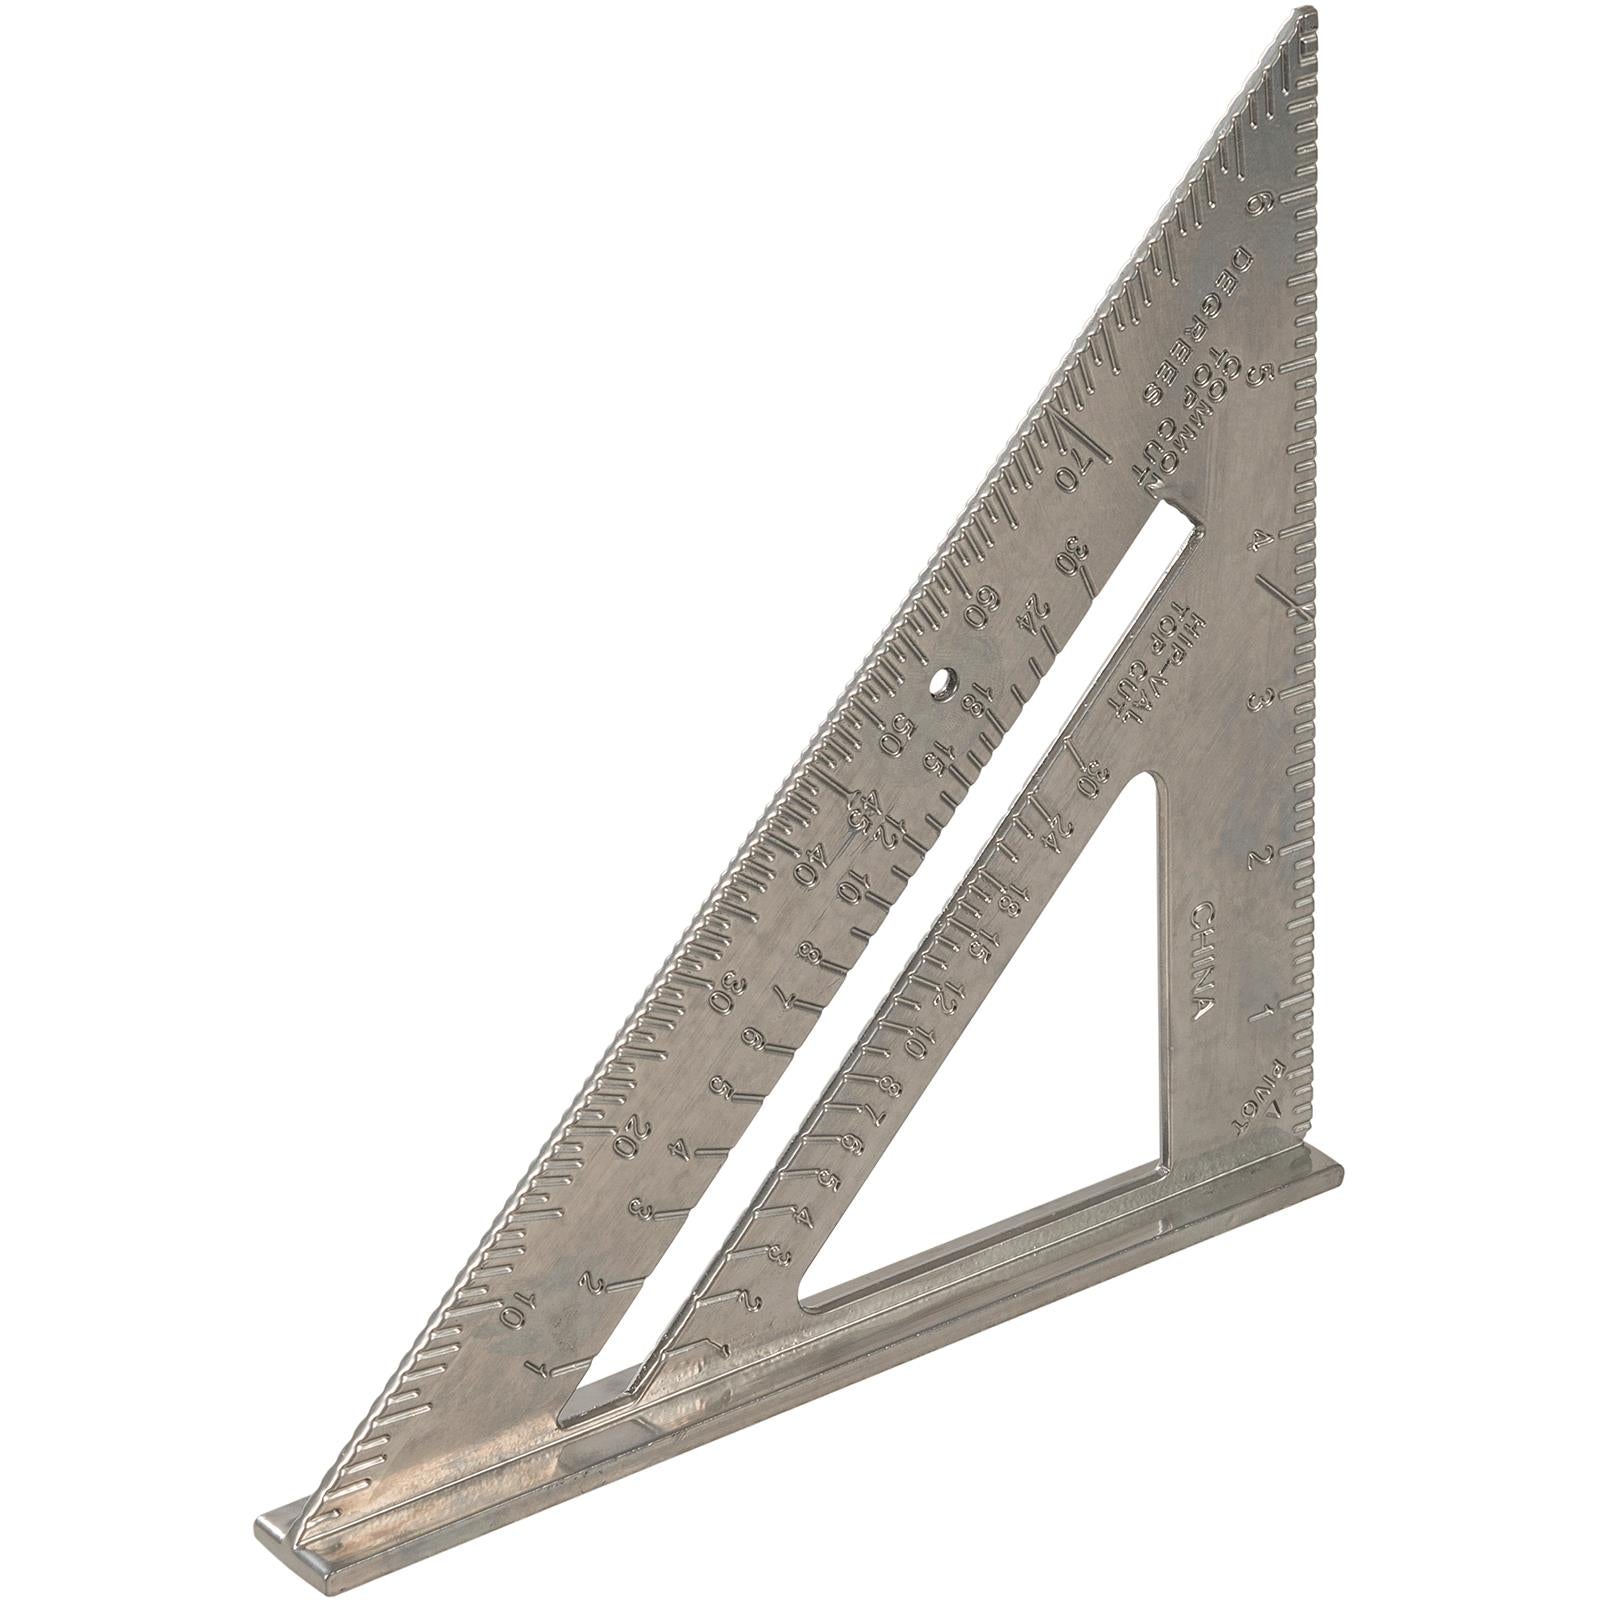 Silverline 7" Aluminium Alloy Roofing Square Framing Roof Mitre Lipped Edge